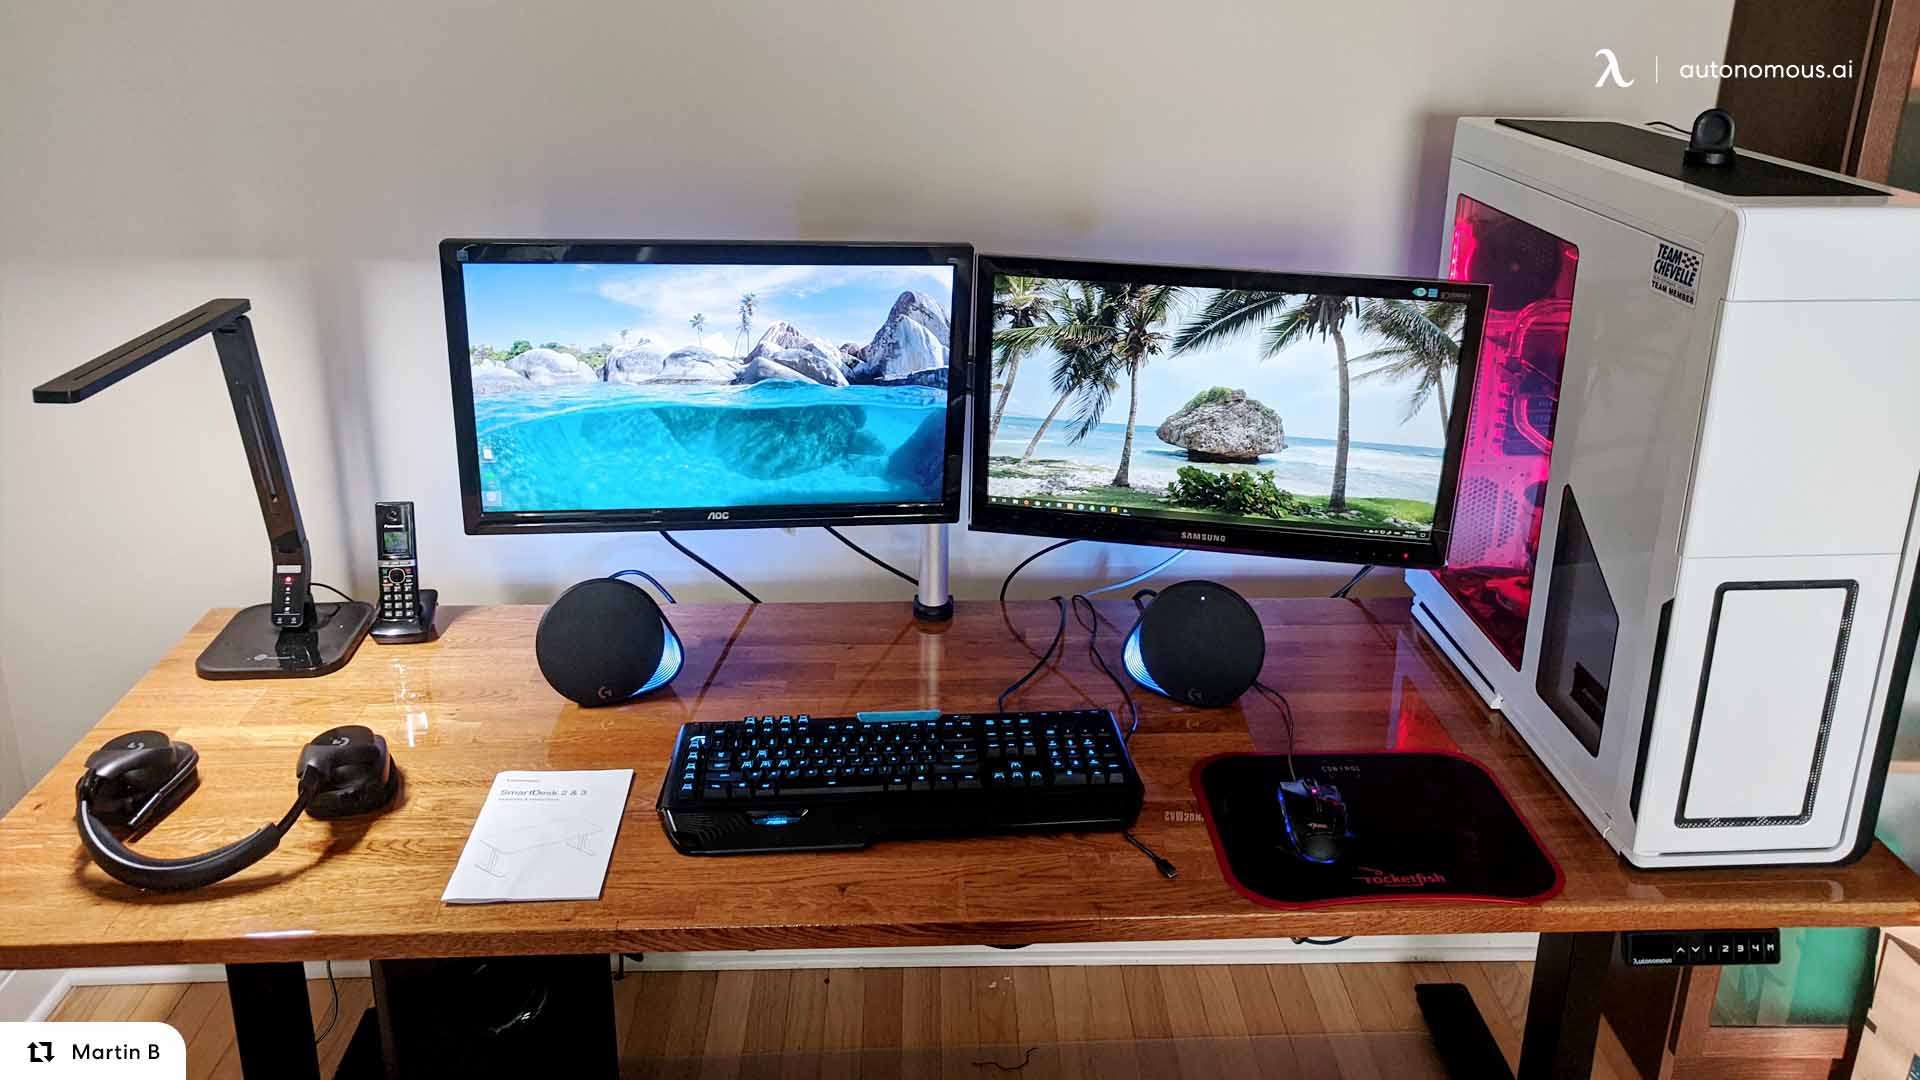 Is It Better to Build Your Own DIY Adjustable Standing Desk?